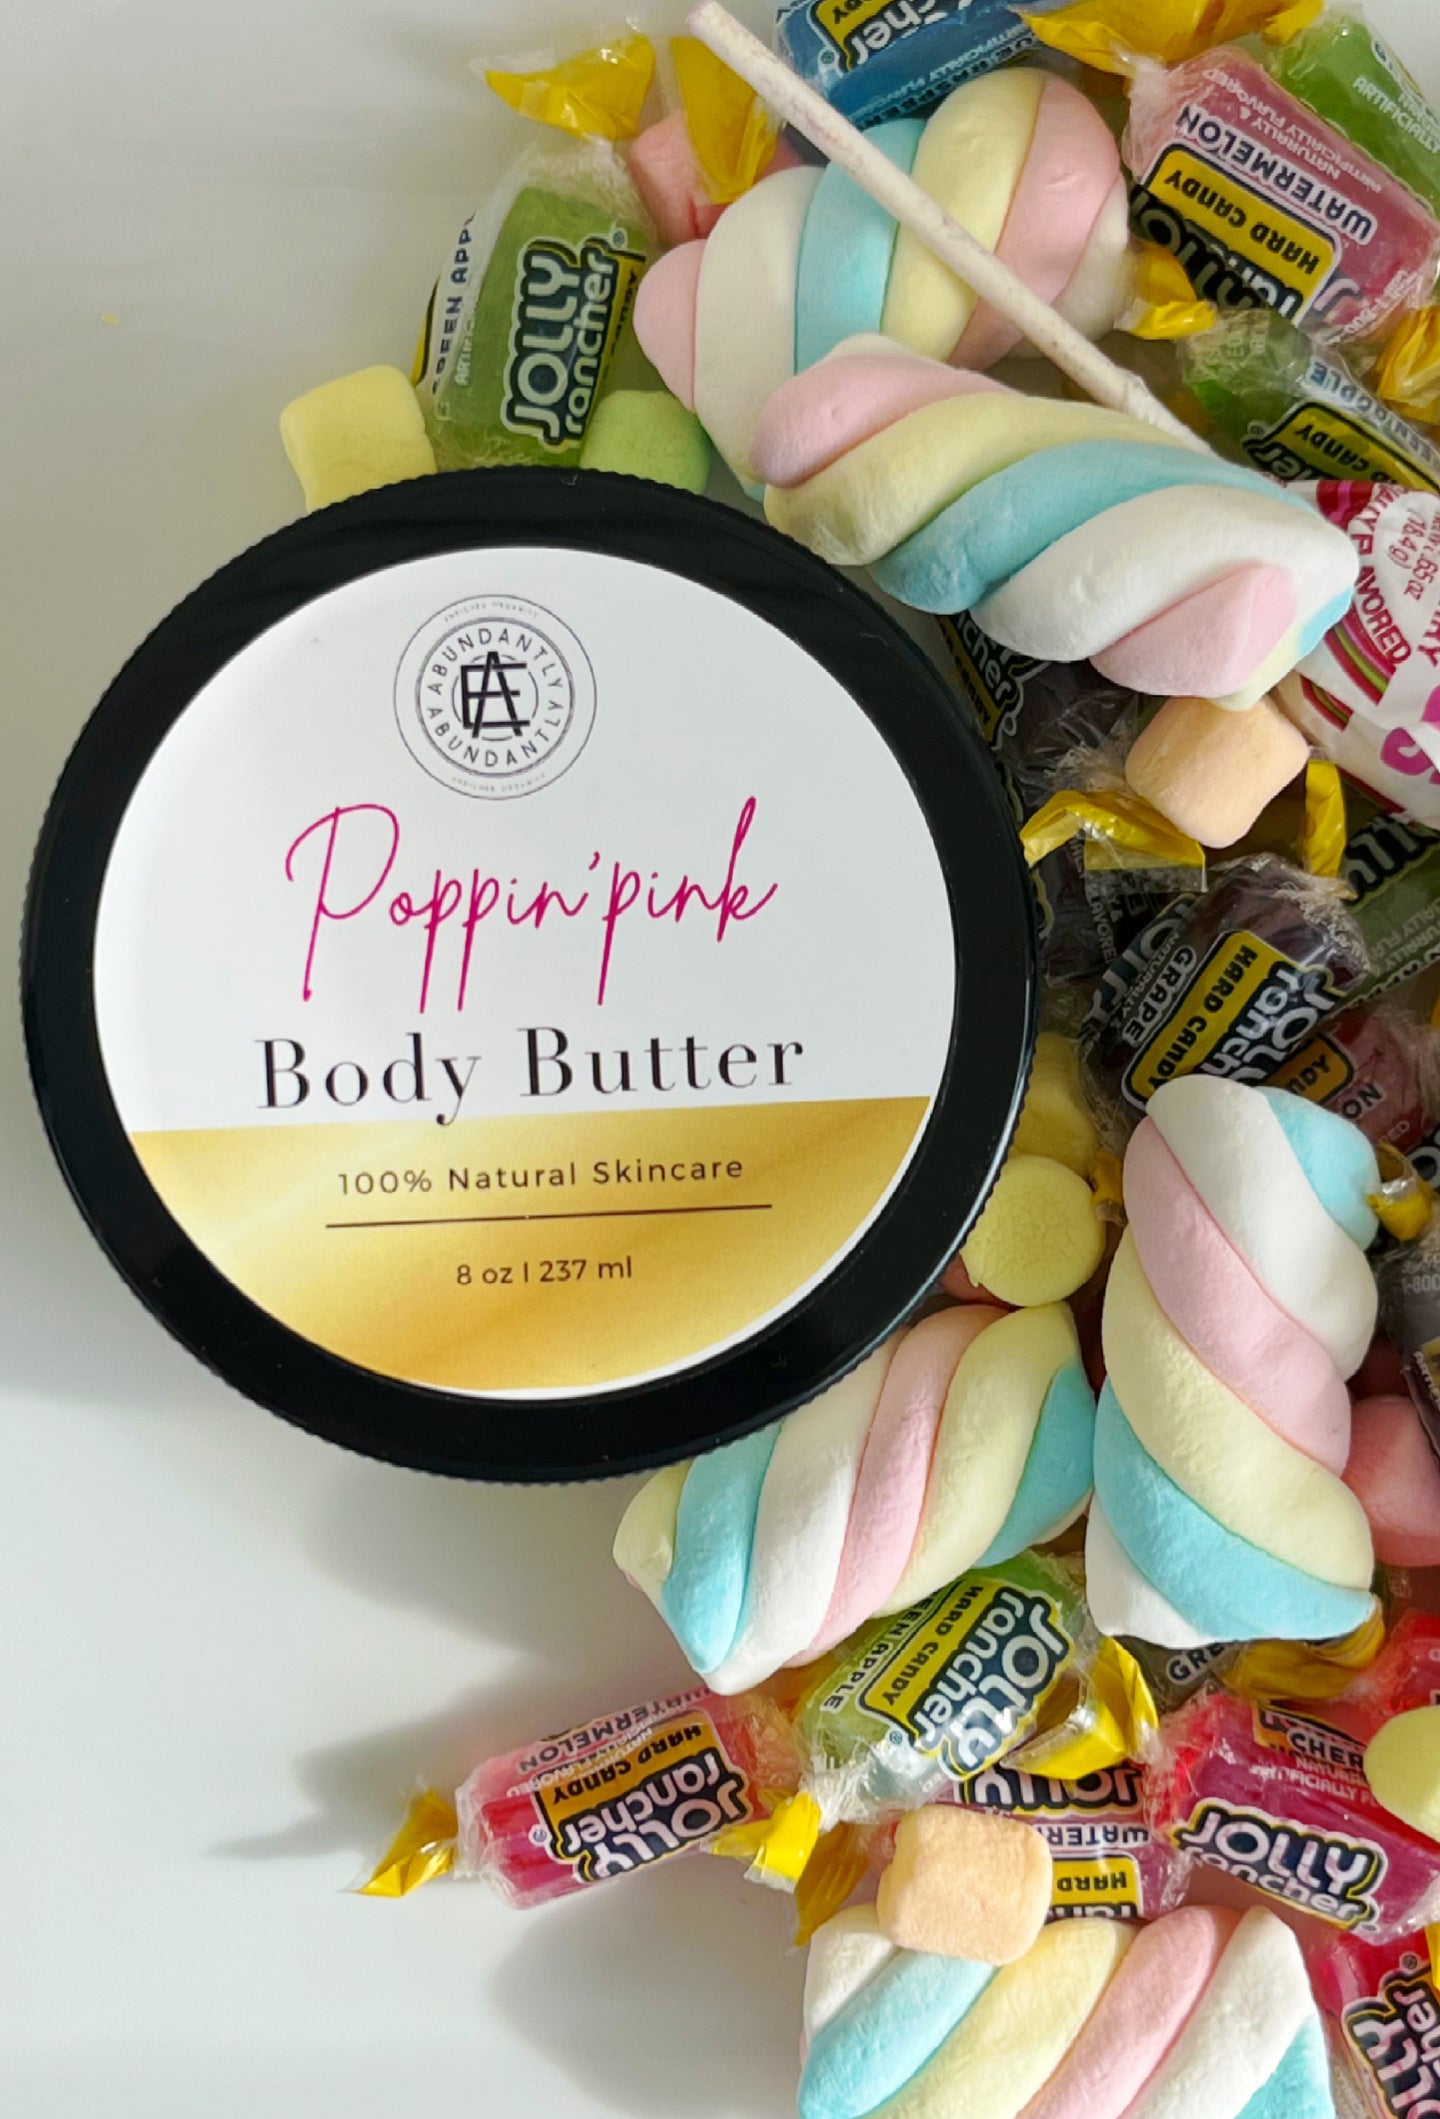 Poppin Pink Whipped Shea Body Butter